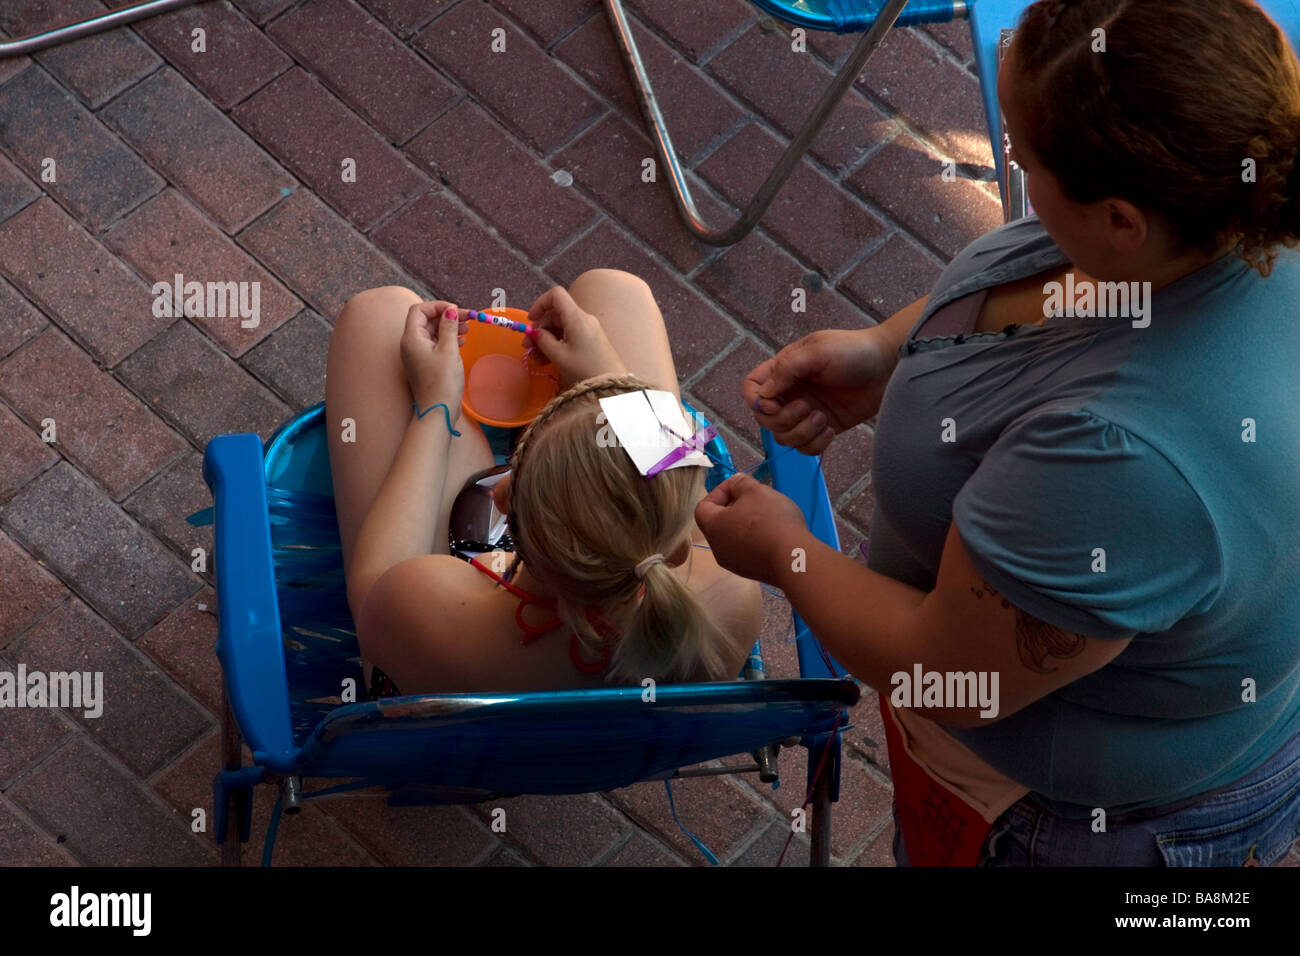 A toursit gets her hair braided by a local worker during spring break while sitting in a chair. Stock Photo